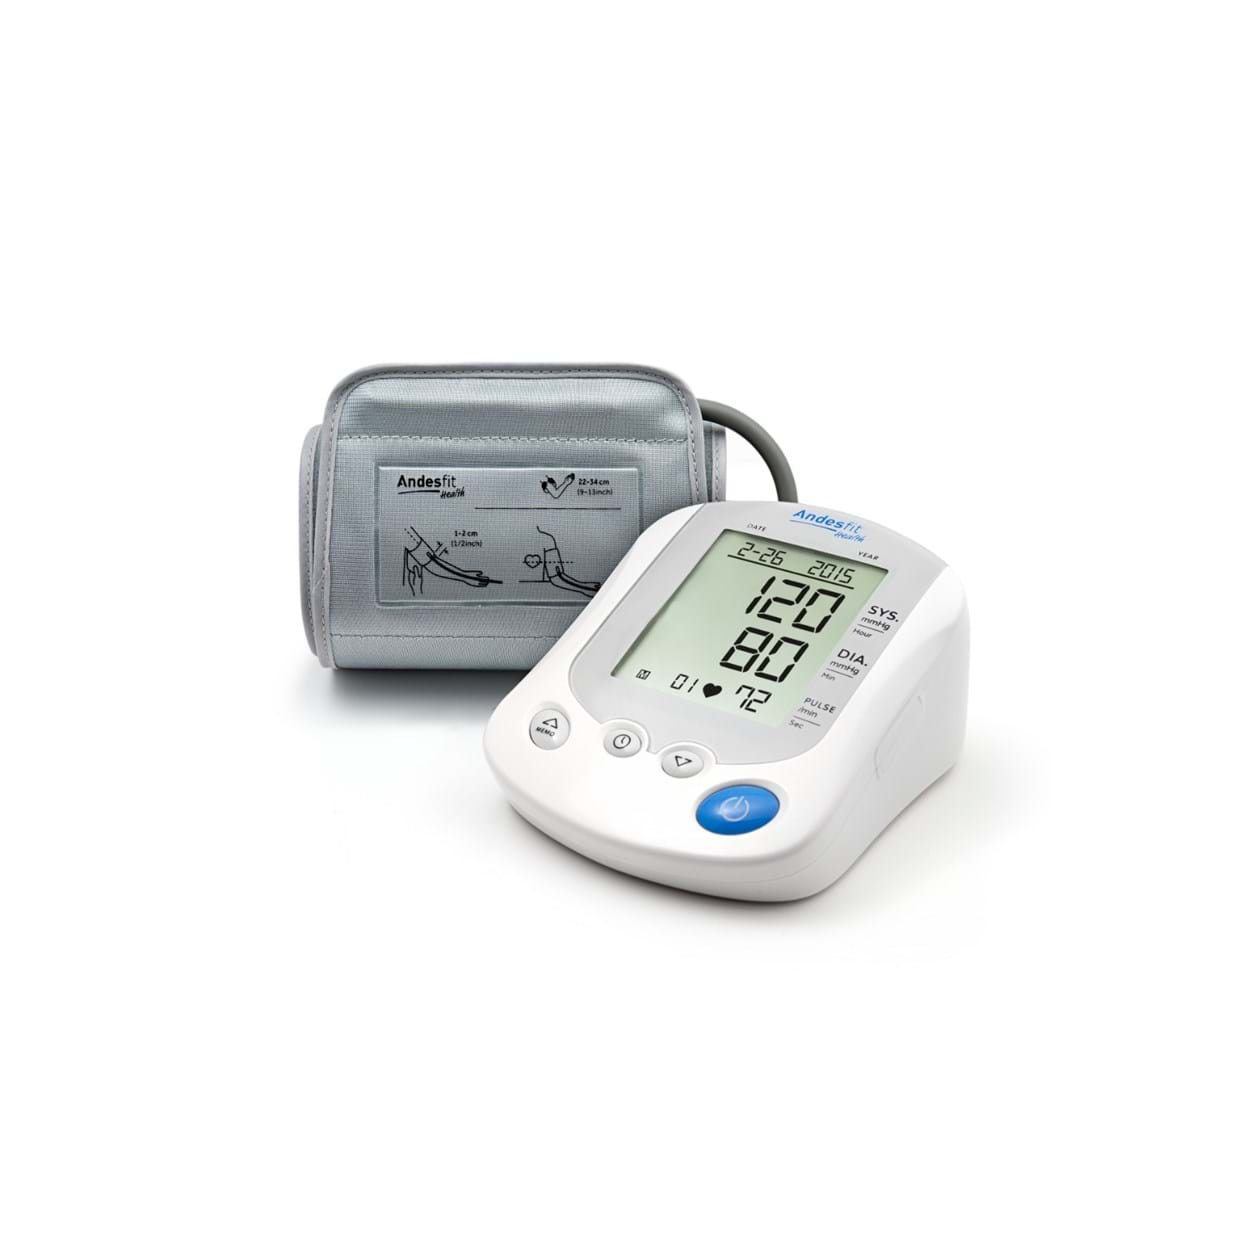 Andestfit Bluetooth 4.0 Arm Type Blood Pressure Monitor ADF-B19 (Deliver Product)